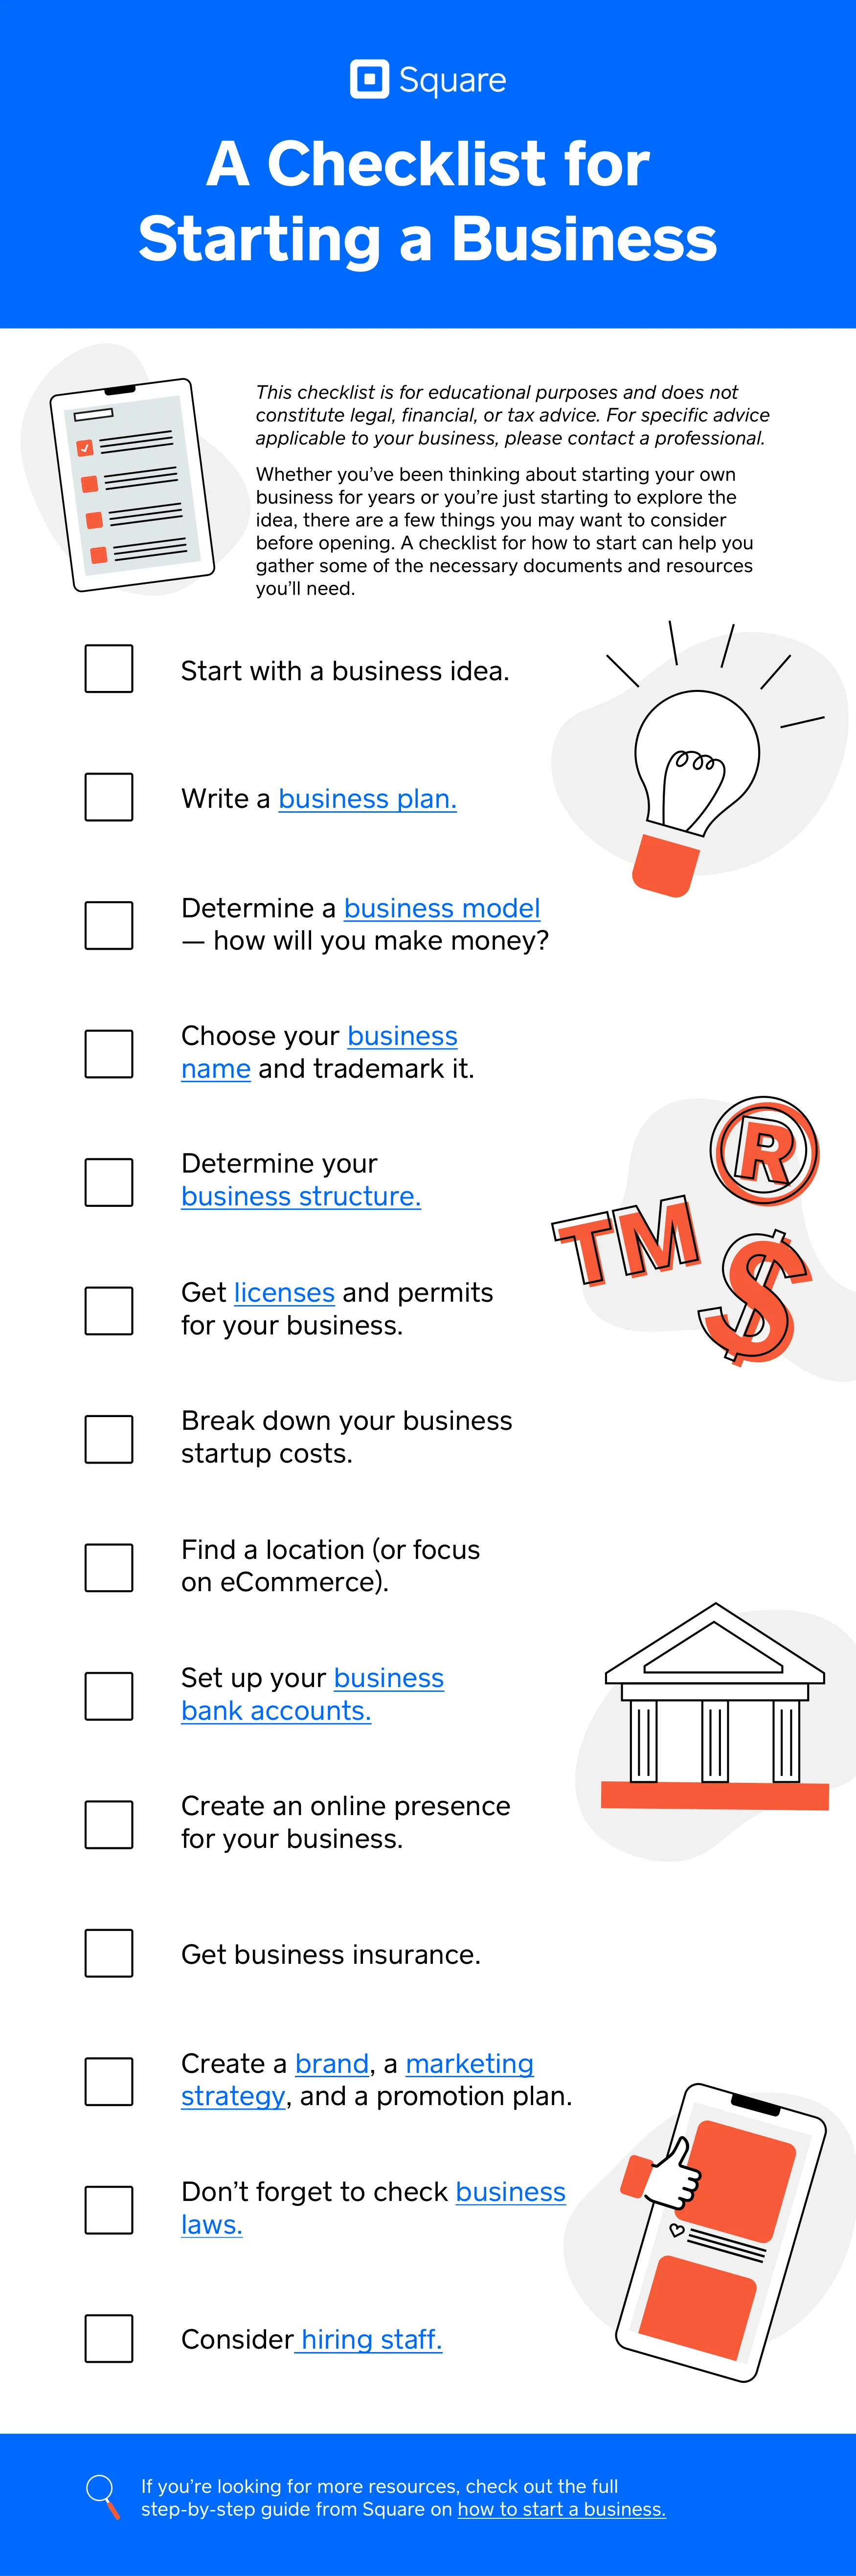 How to start a business checklist